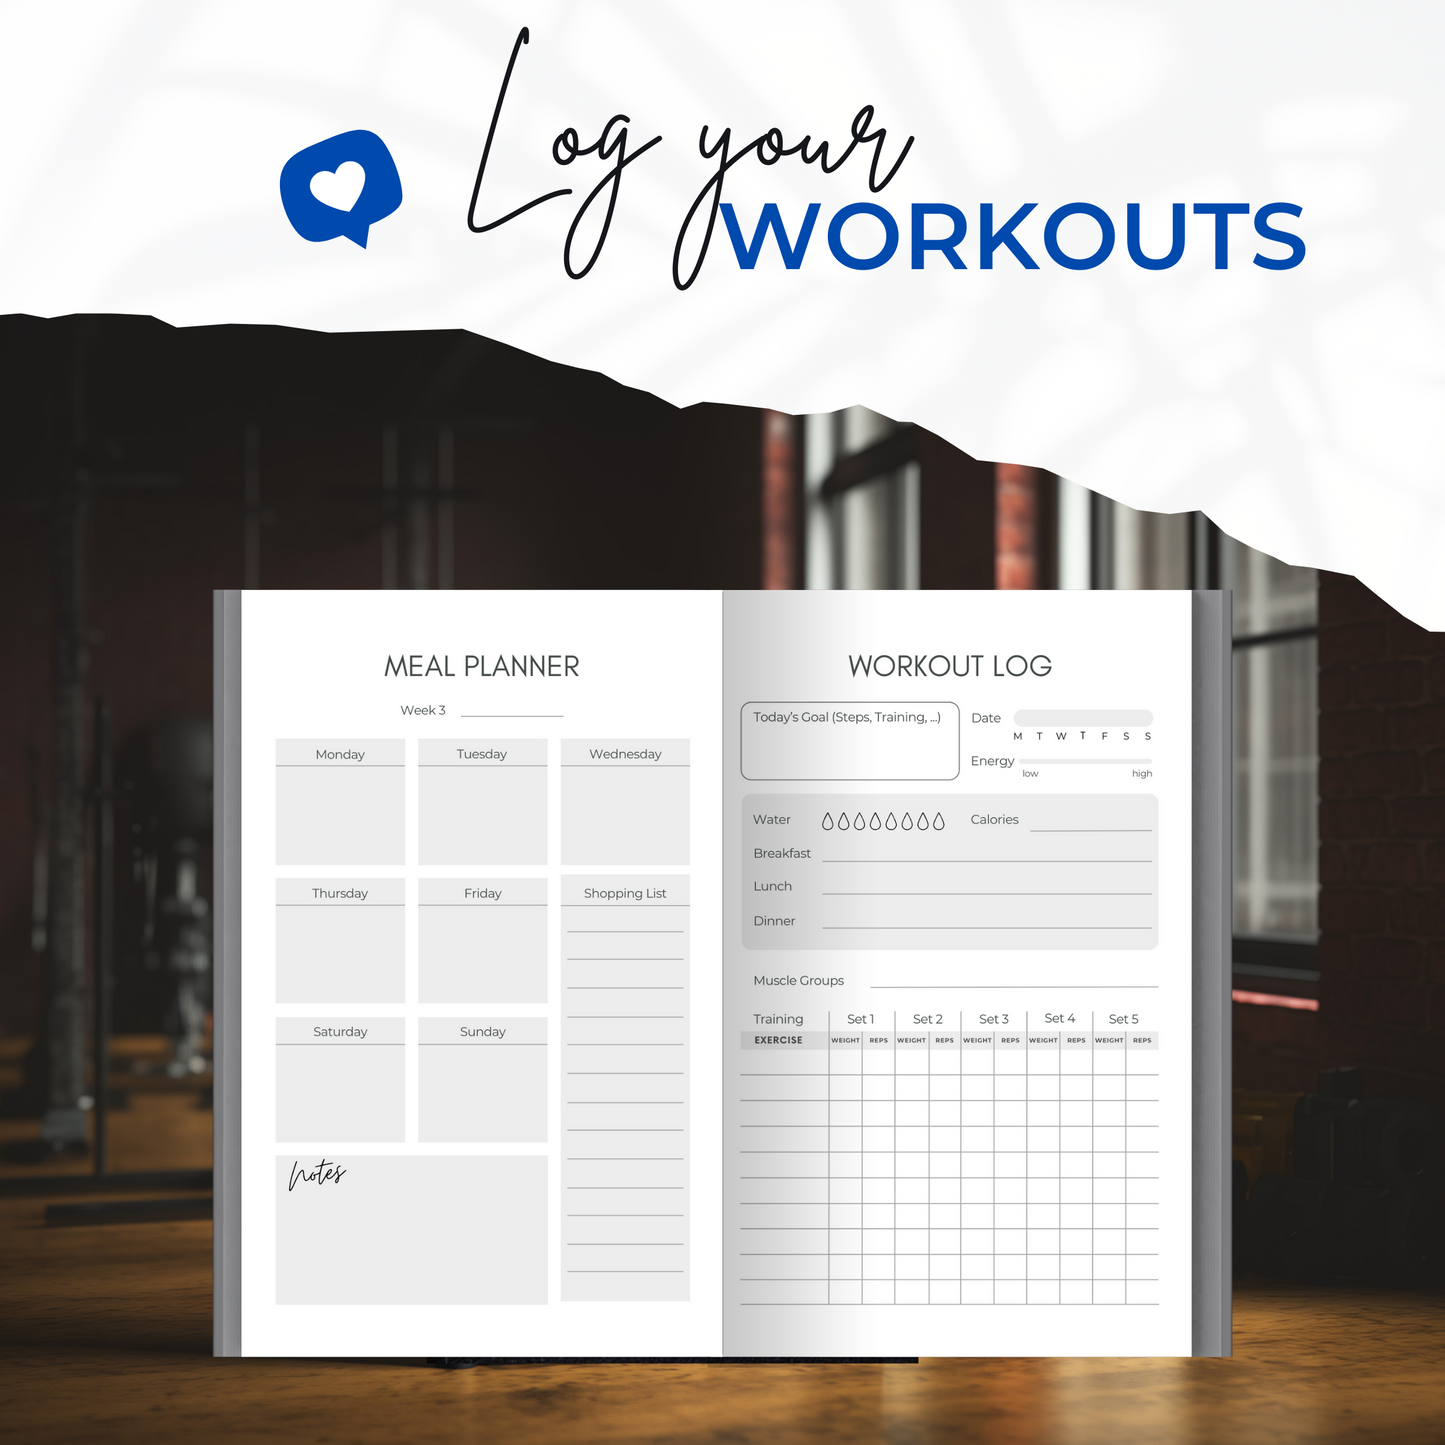 Fitness Planner for Goal-Driven Workouts, Progress and Weight Loss